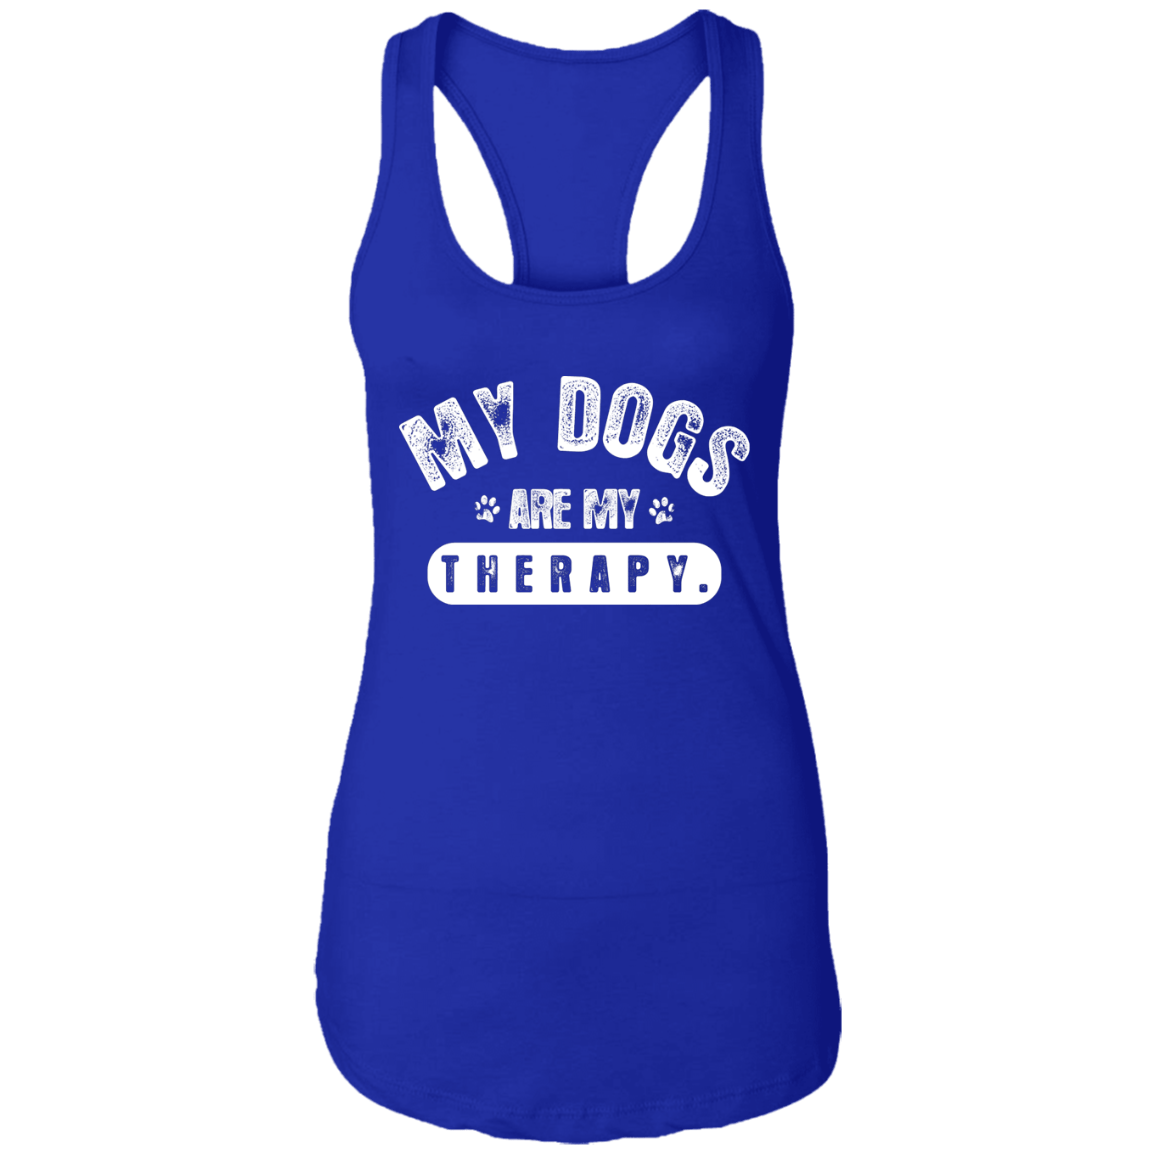 My Dogs Are My Therapy - Ladies Racer Back Tank.